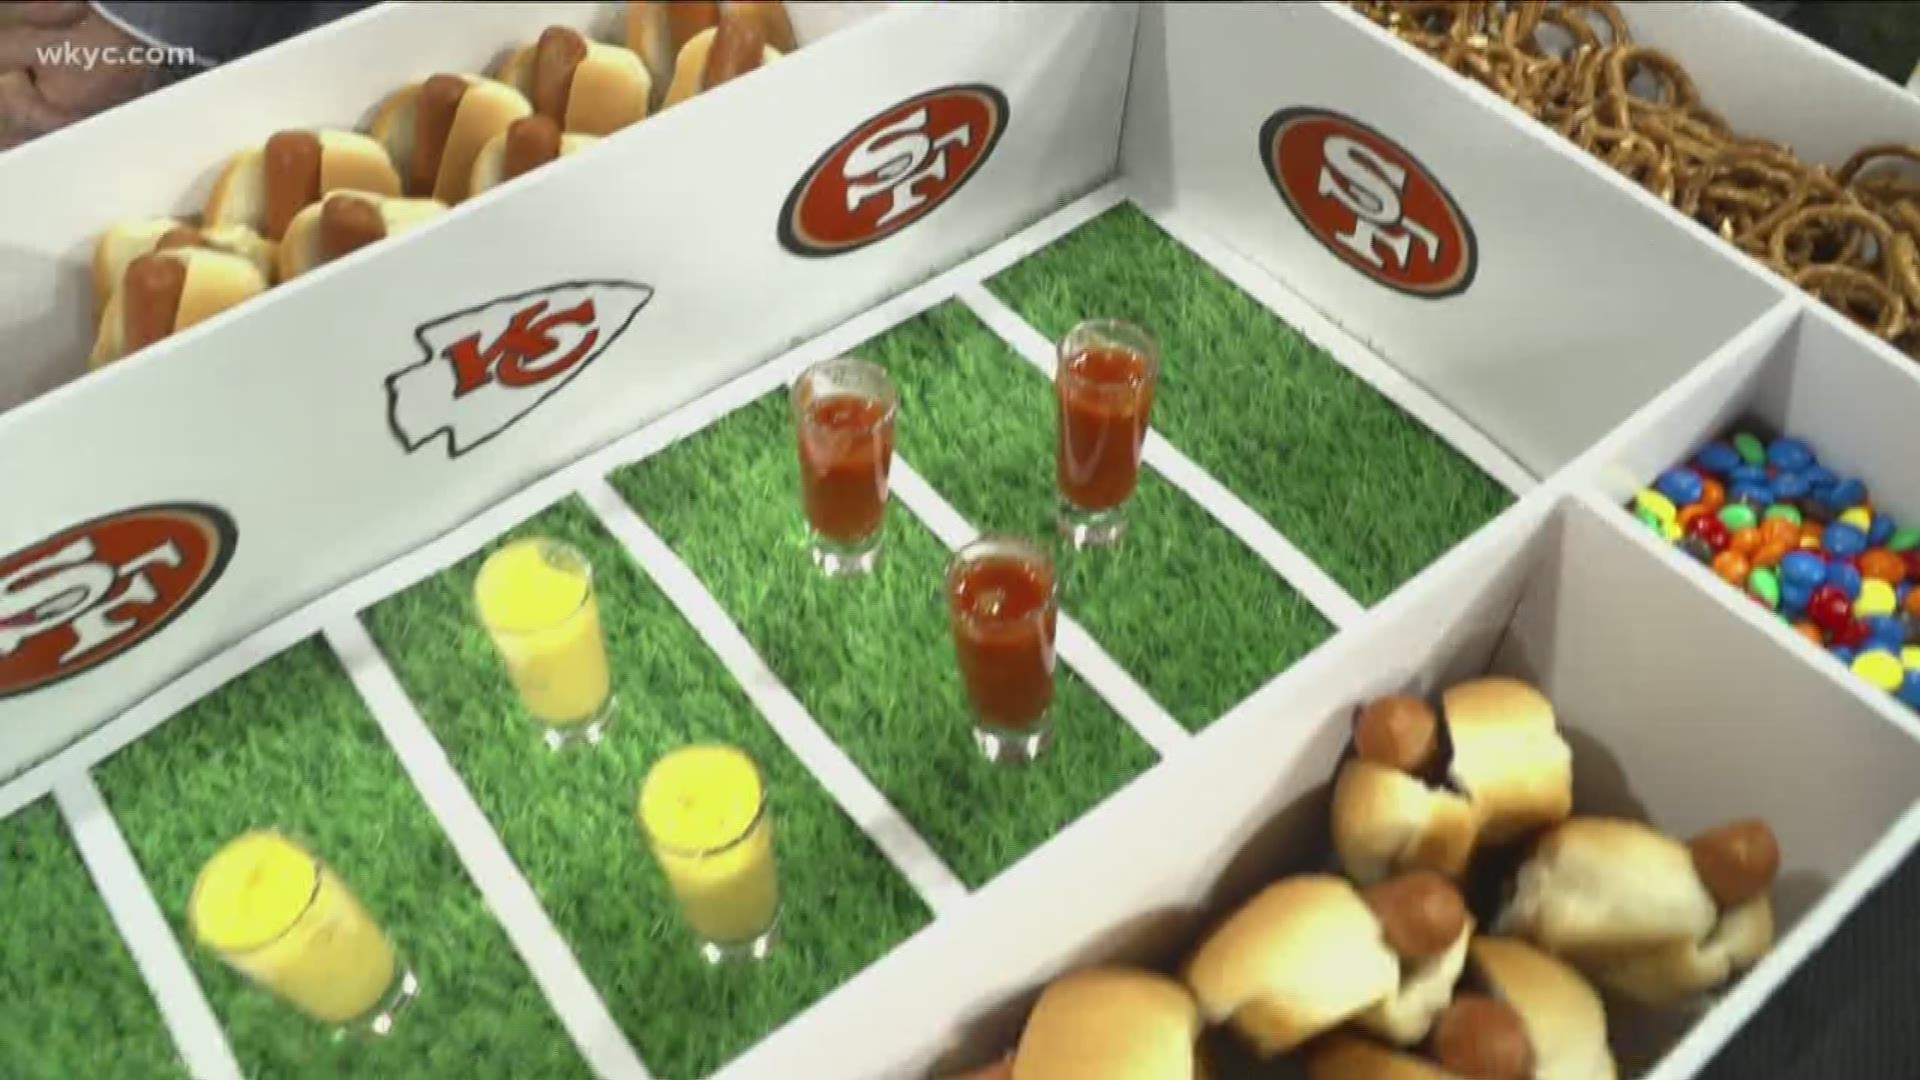 Super Bowl Sunday is just days away. Here's how to put the winning touch on your food.